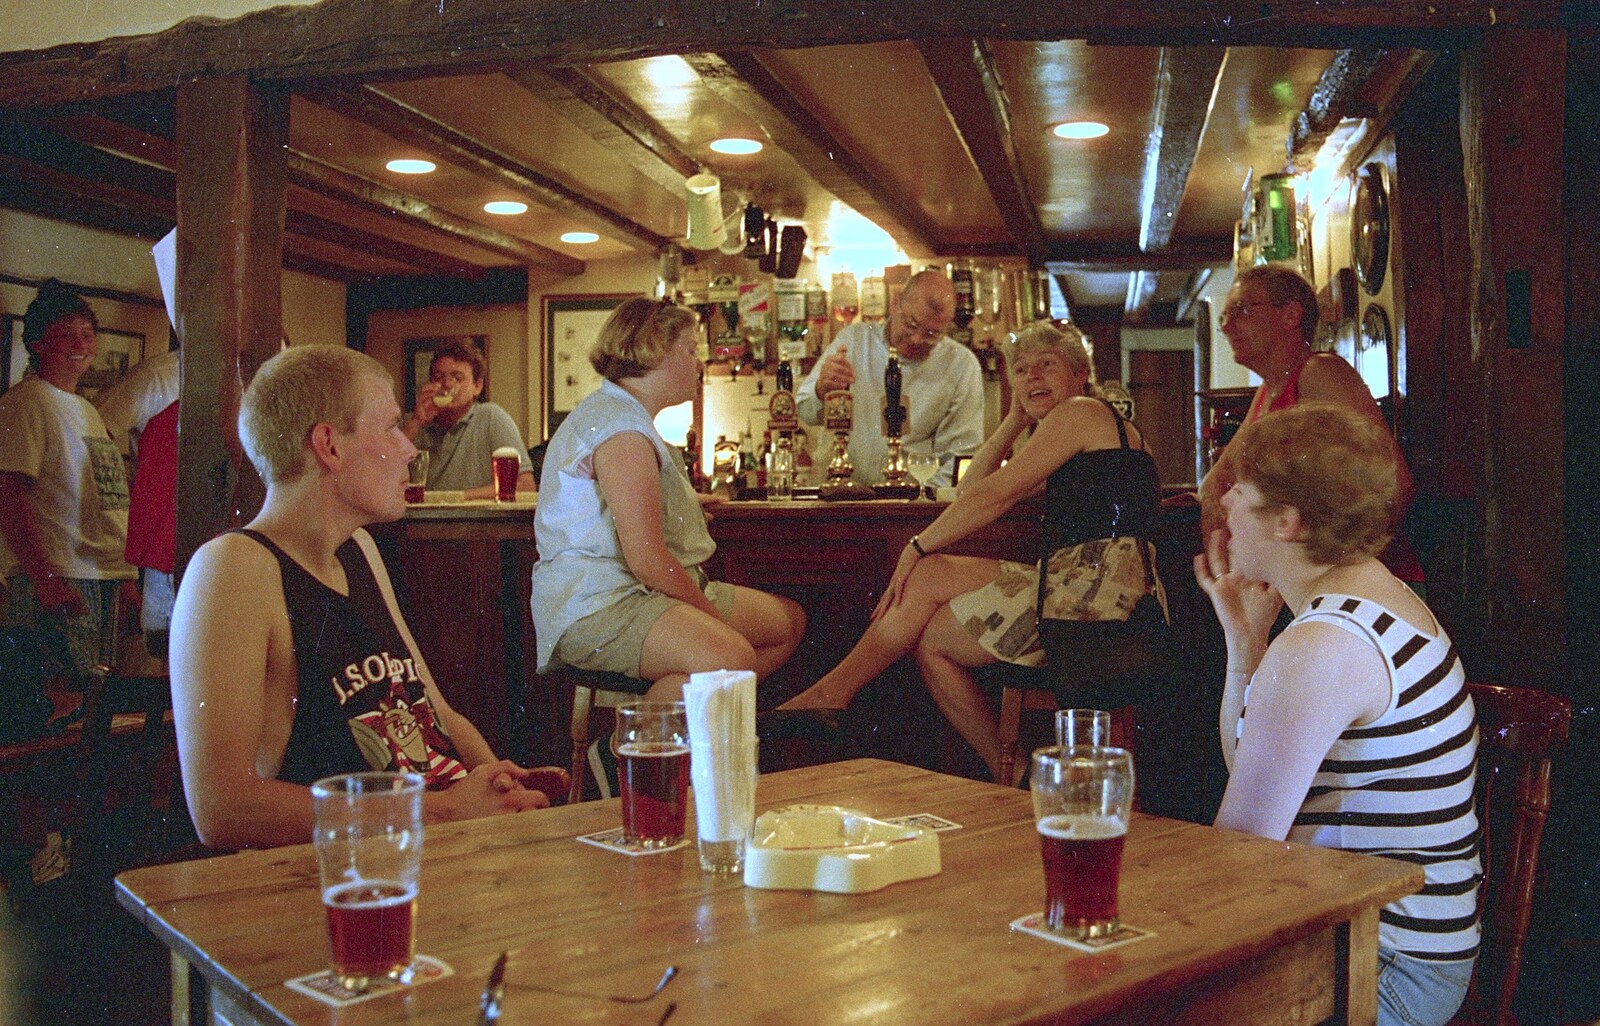 It's pub o'clock from The First BSCC Bike Ride to Southwold, Suffolk - 10th June 1996